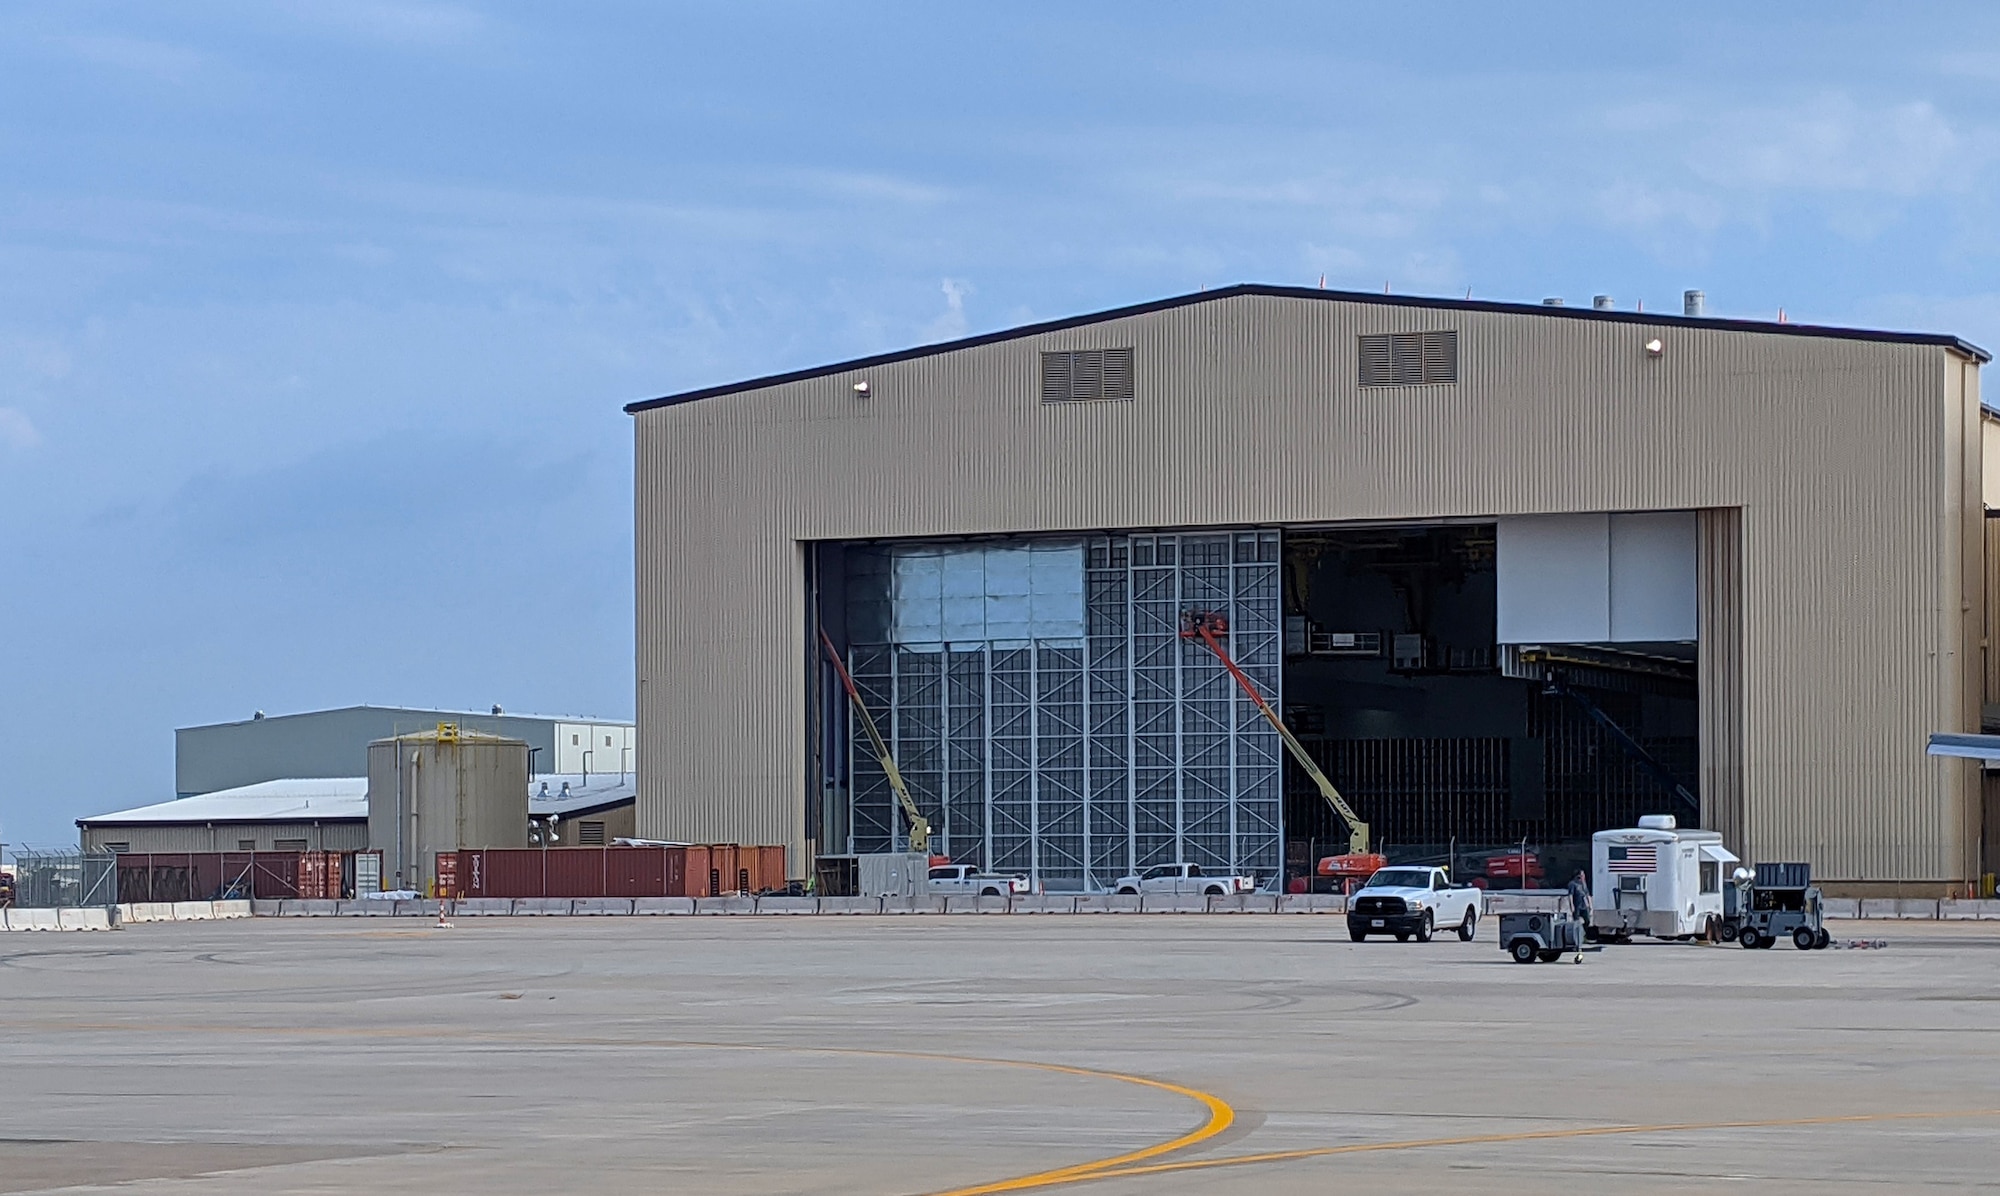 KC-46 corrosion control hangar at Tinker Air Force Base, Oklahoma, a designated maintenance hub for the new refueling tanker. (U.S. Air Force photo)